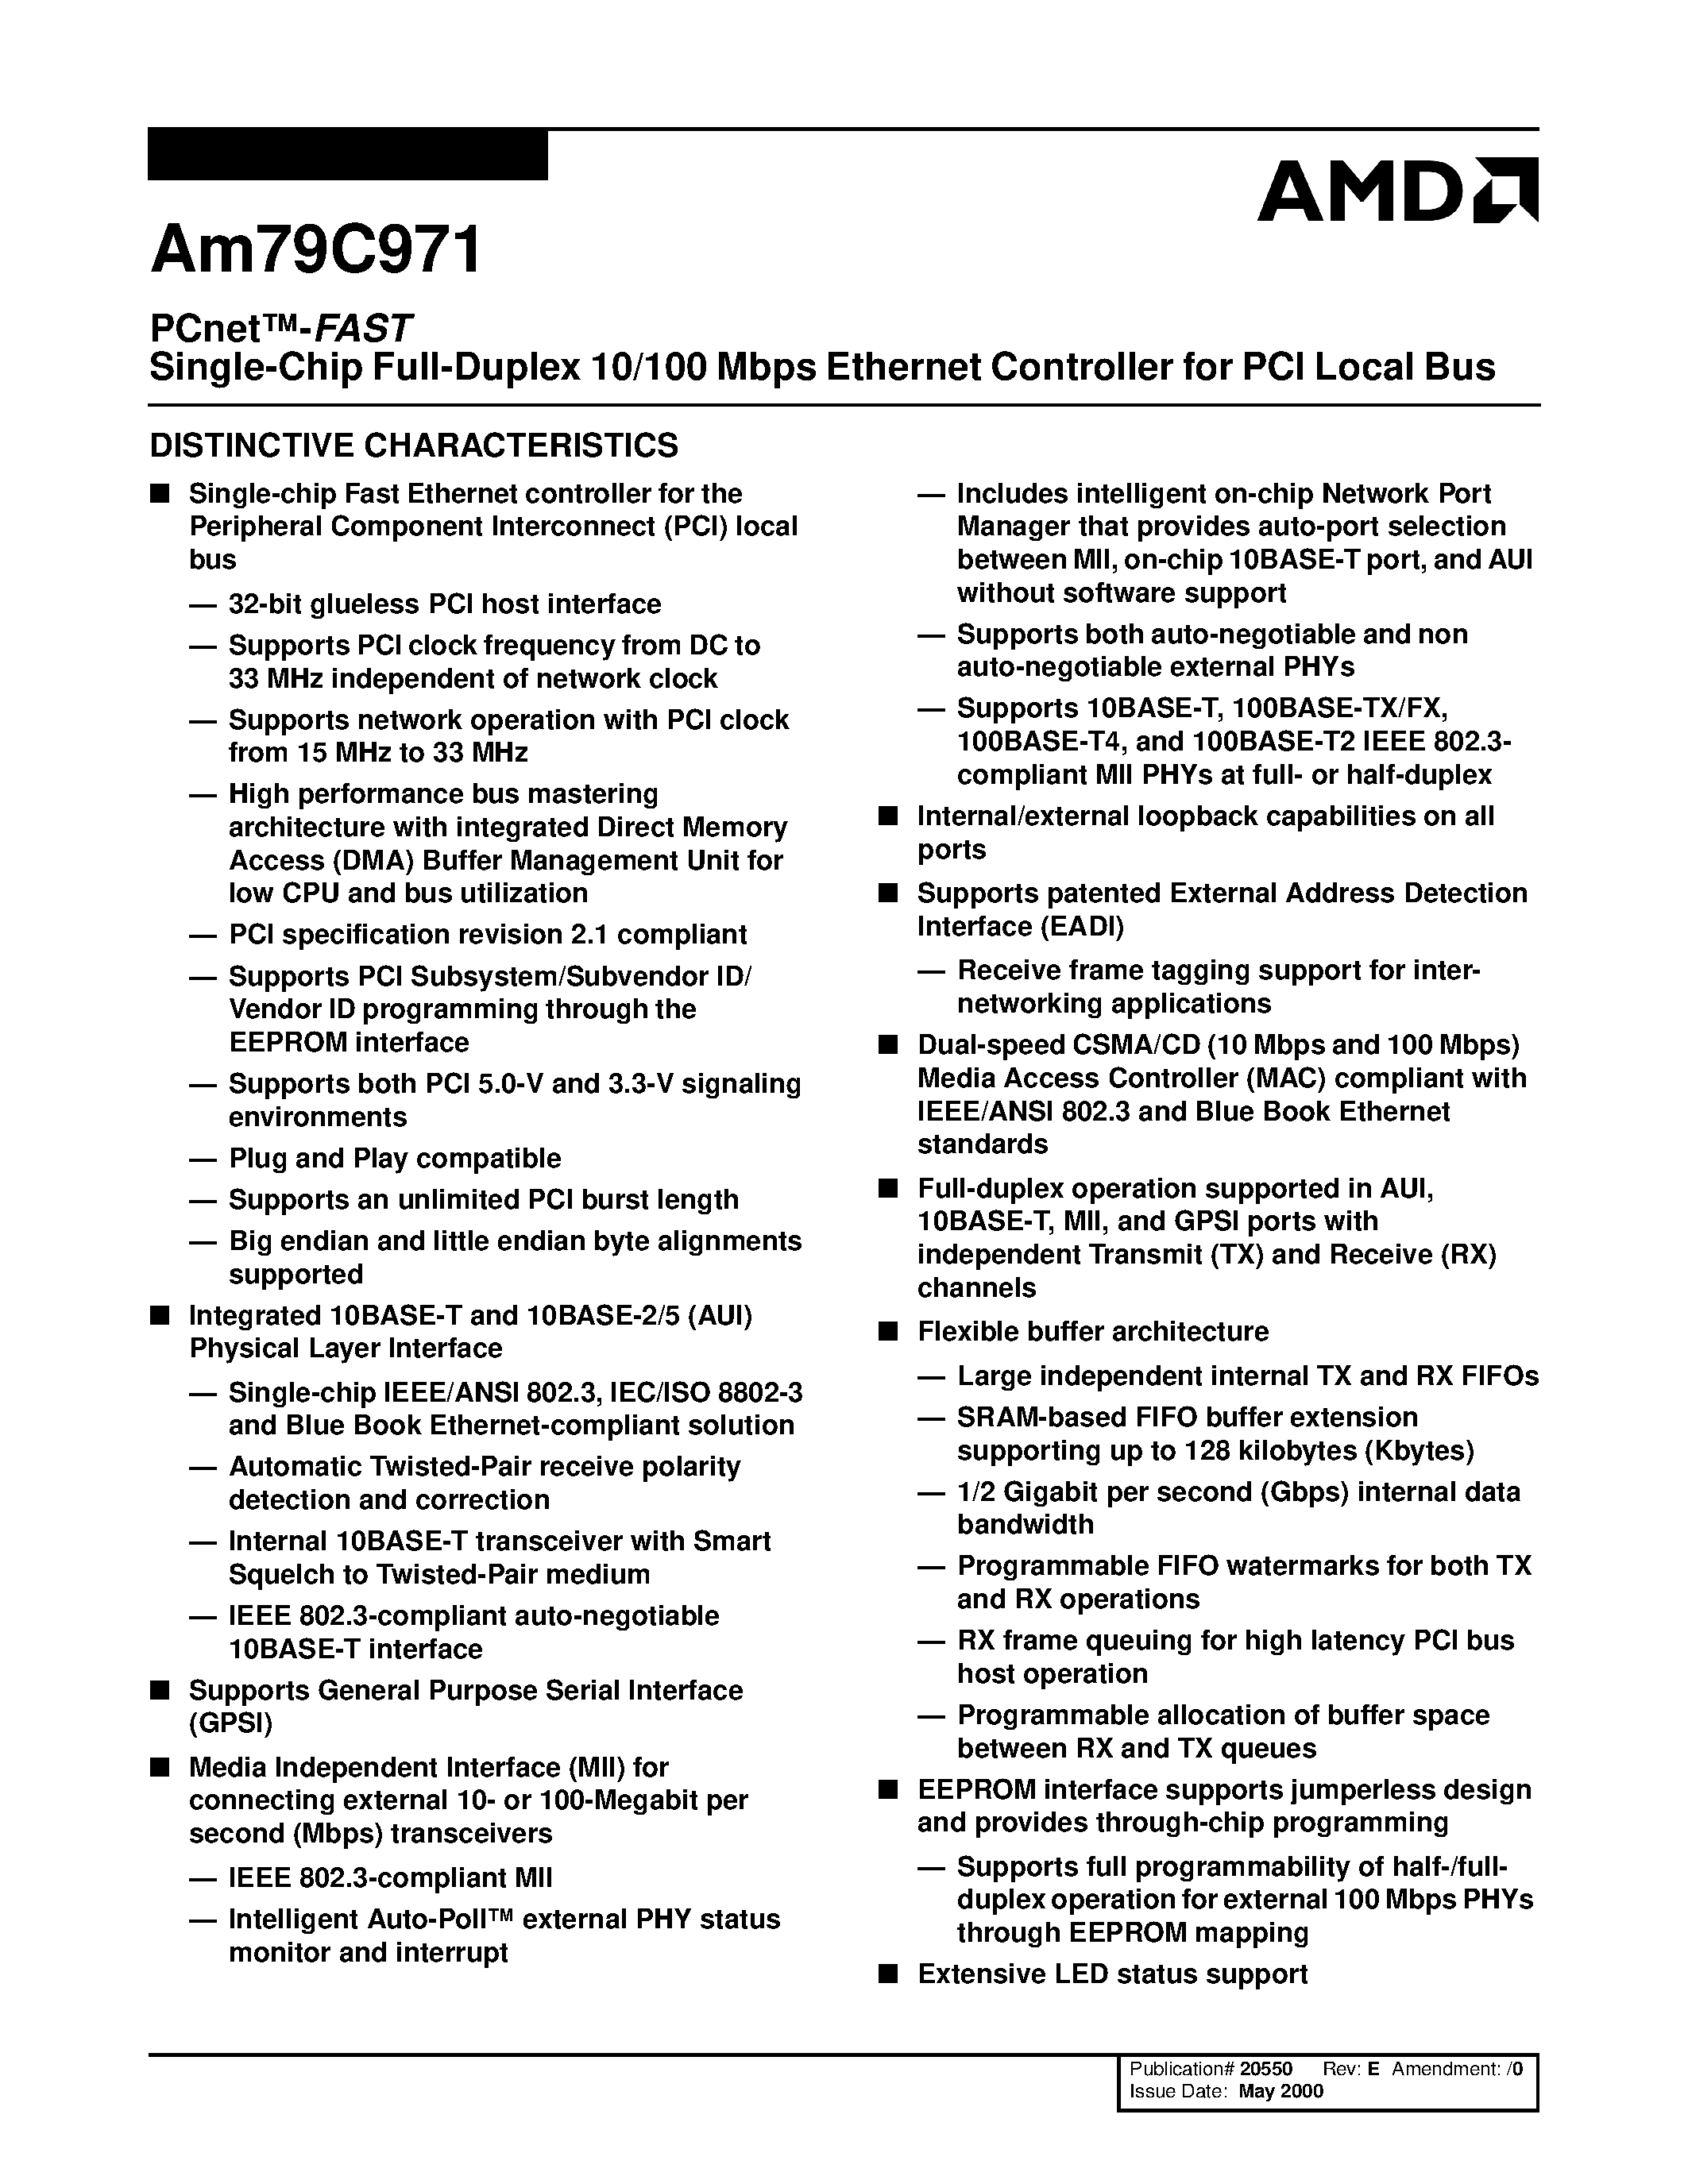 Даташит Am79C971VCW - PCnet-FAST Single-Chip Full-Duplex 10/100 Mbps Ethernet Controller for PCI Local Bus страница 1